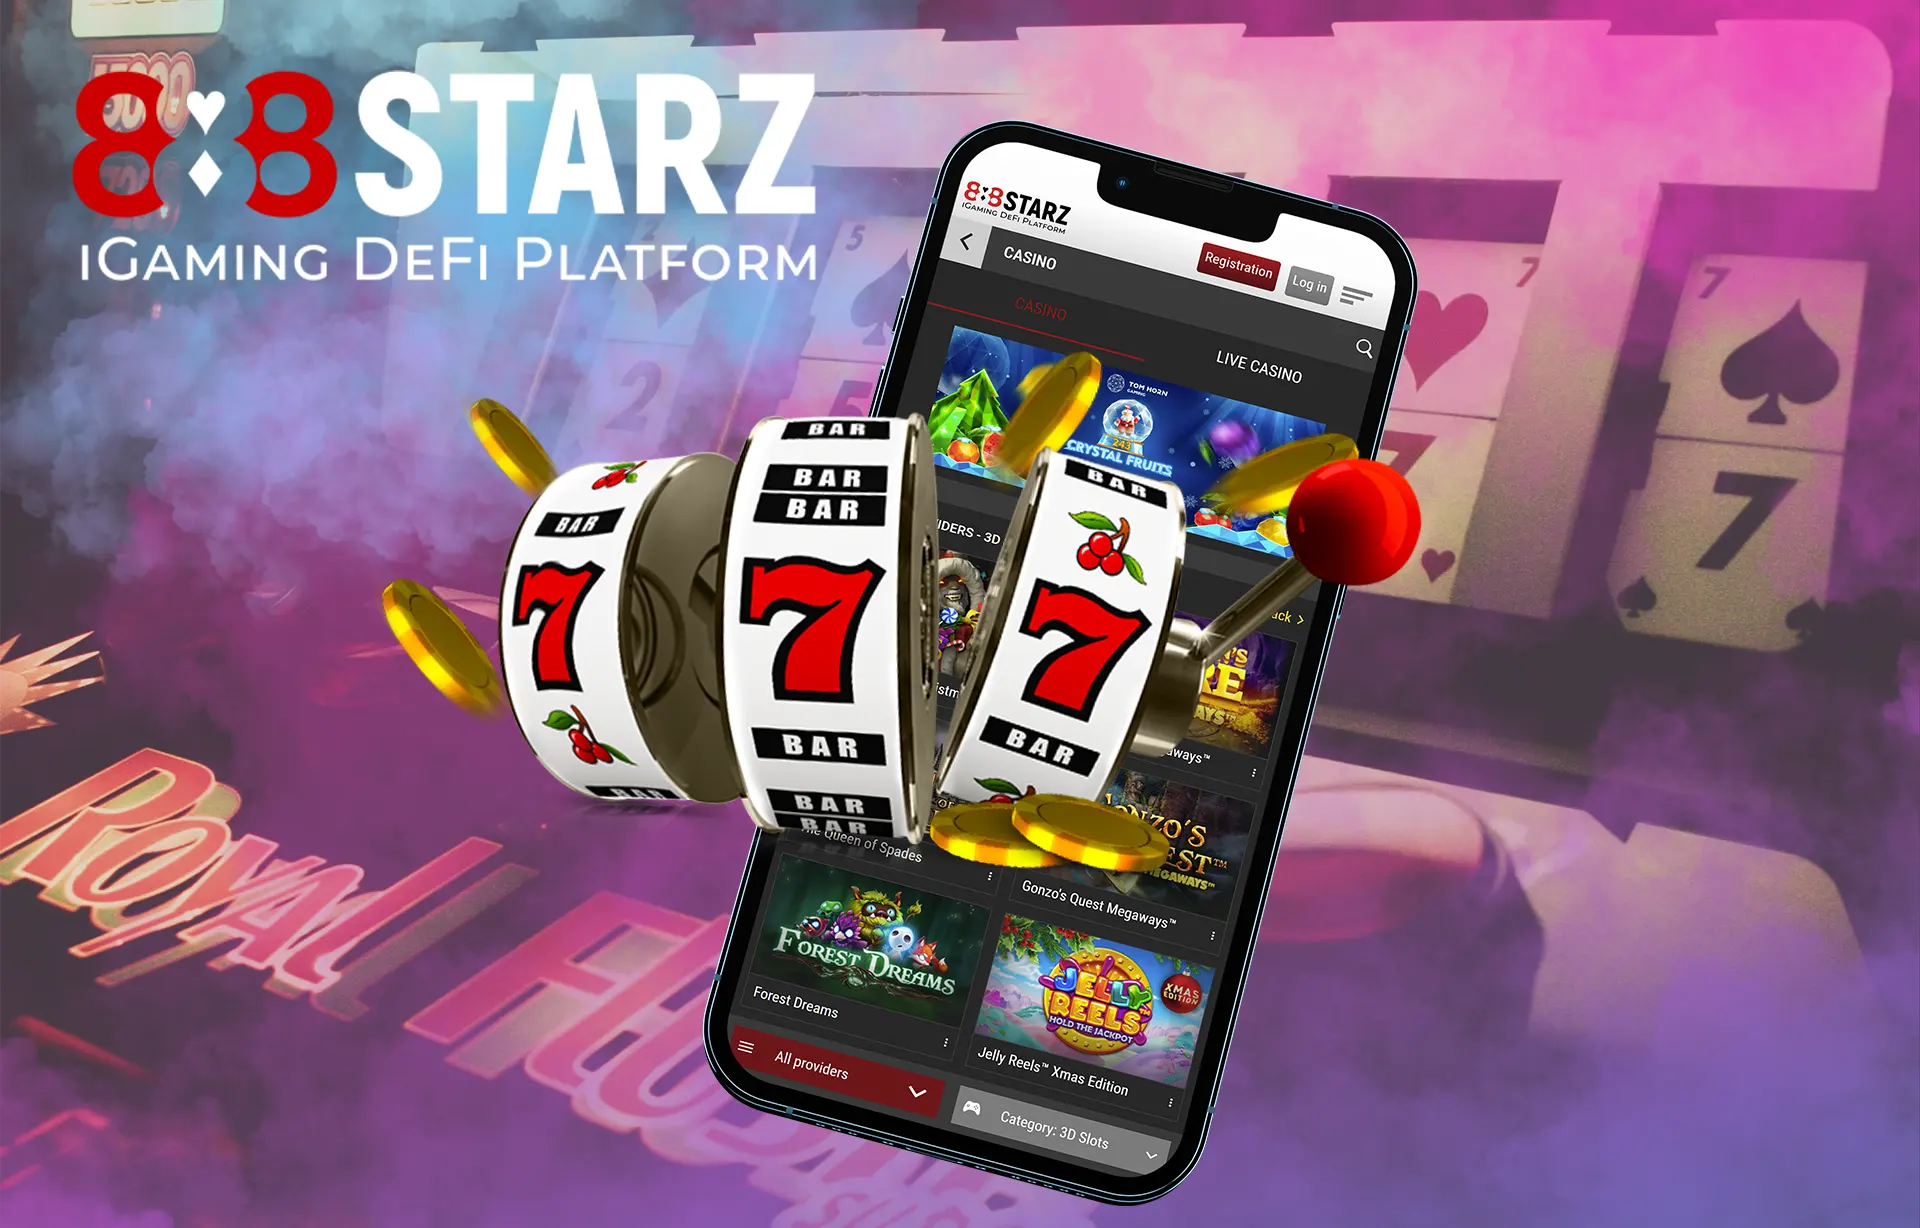 This type of casino 888starz will help beginners quickly get the hang of as well as surprise advanced, there are only quality suppliers of games.